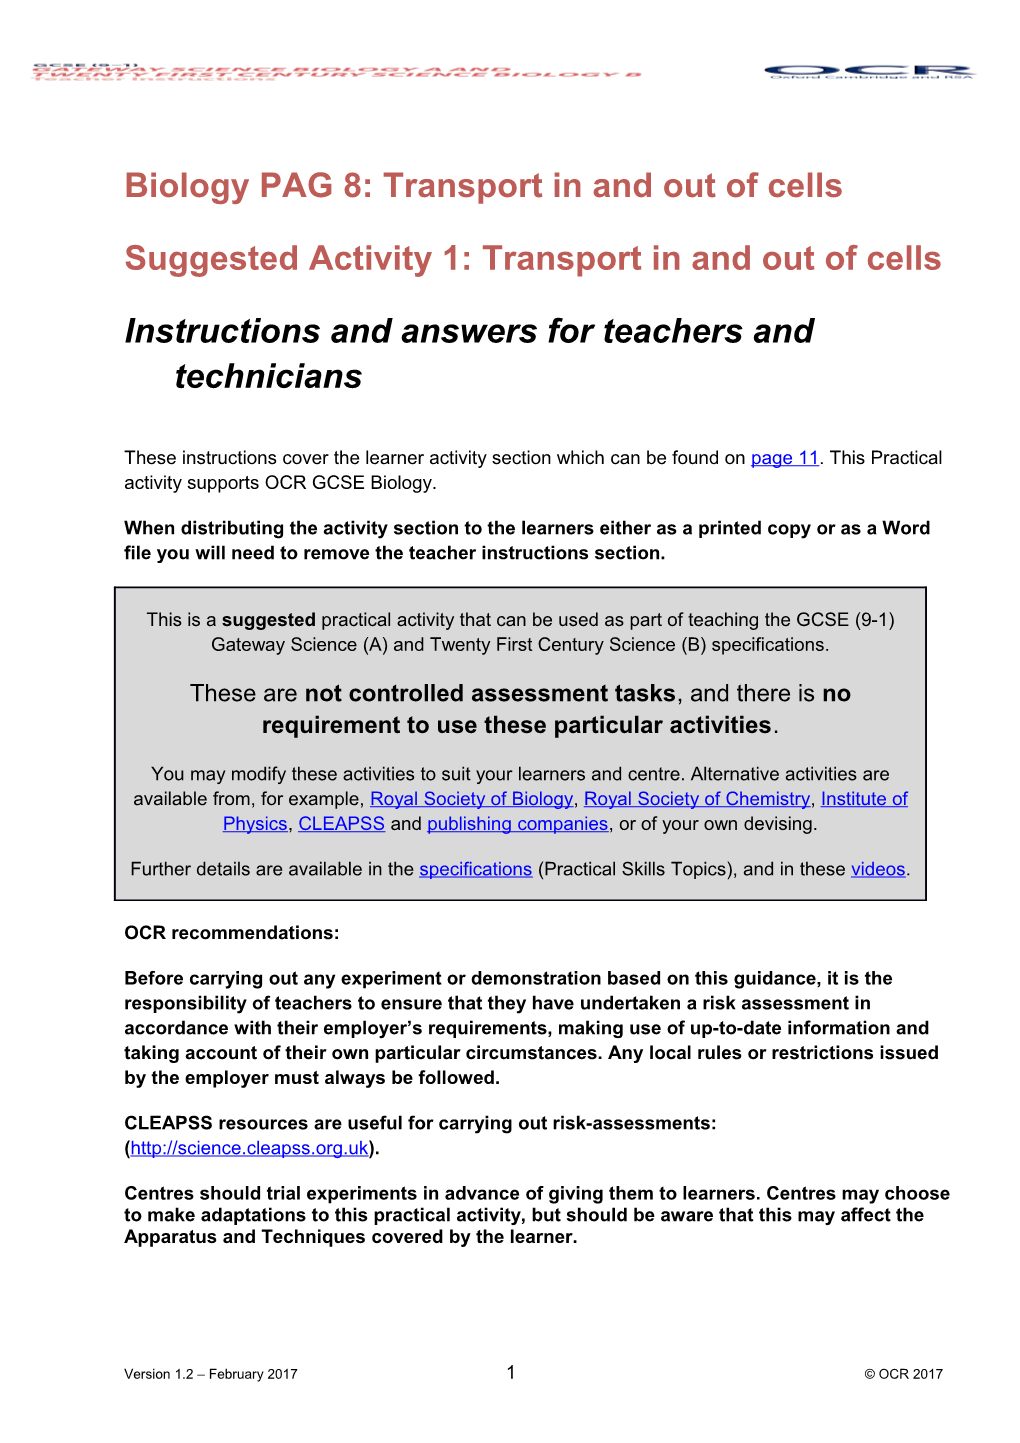 OCR GCSE Science Biology a and B PAG 8: Transport in and out of Cells